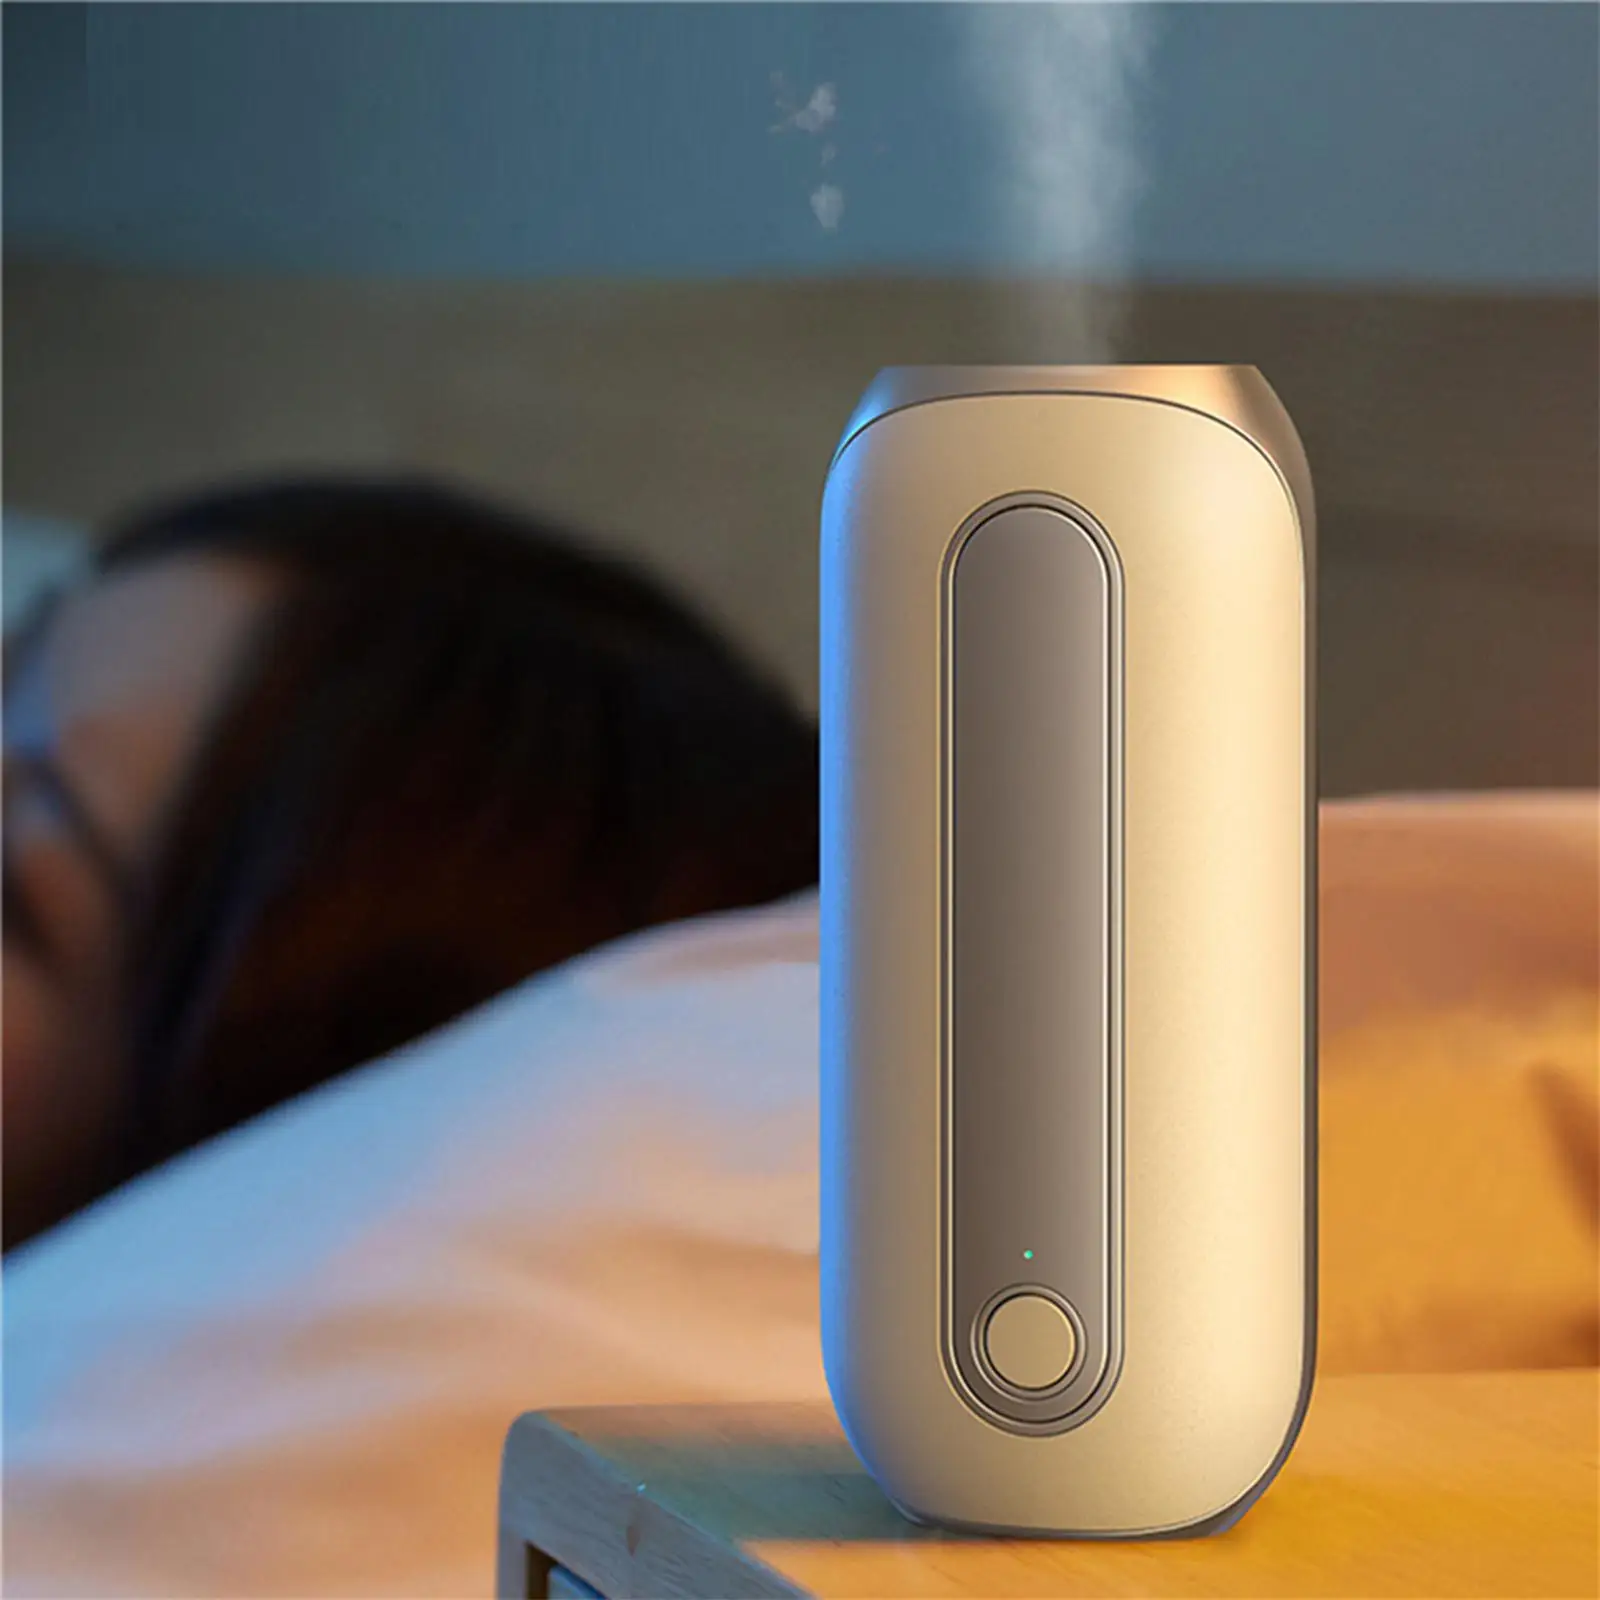 Perfume Diffuser Wall Mounted Super Quiet Scent Machine for Toilet Hotel